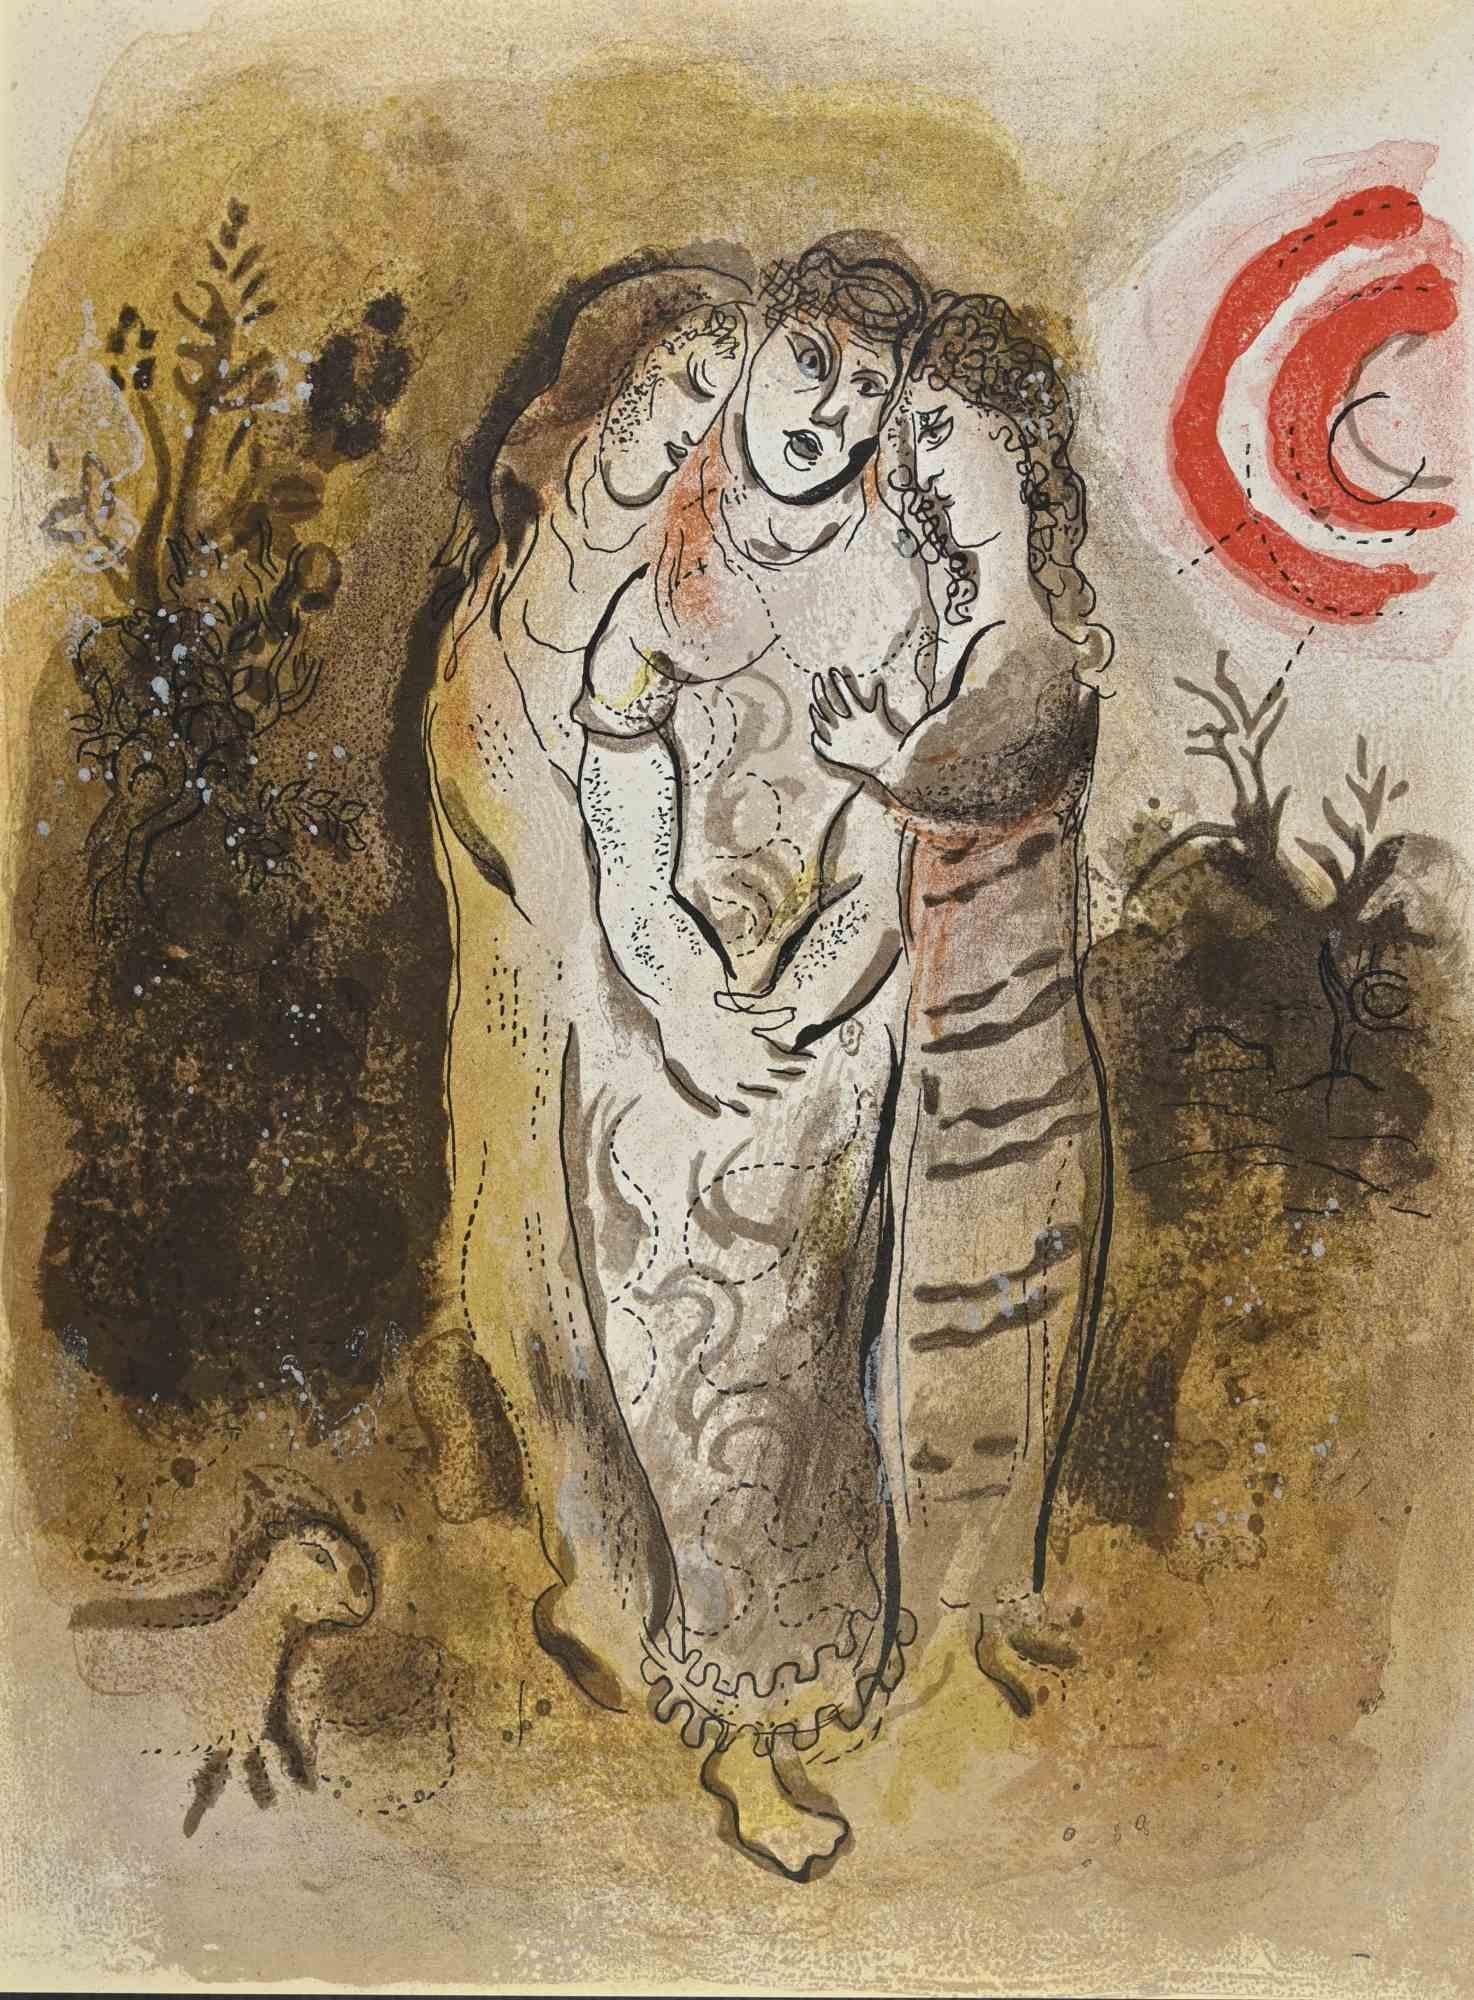 Naomi and her daughters is an artwork from the Series "The Bible", realized by Marc Chagall in 1960.

Mixed colored lithograph on brown-toned paper, no signature.

Edition of 6500 unsigned lithographs. Printed by Mourlot and published by Tériade,